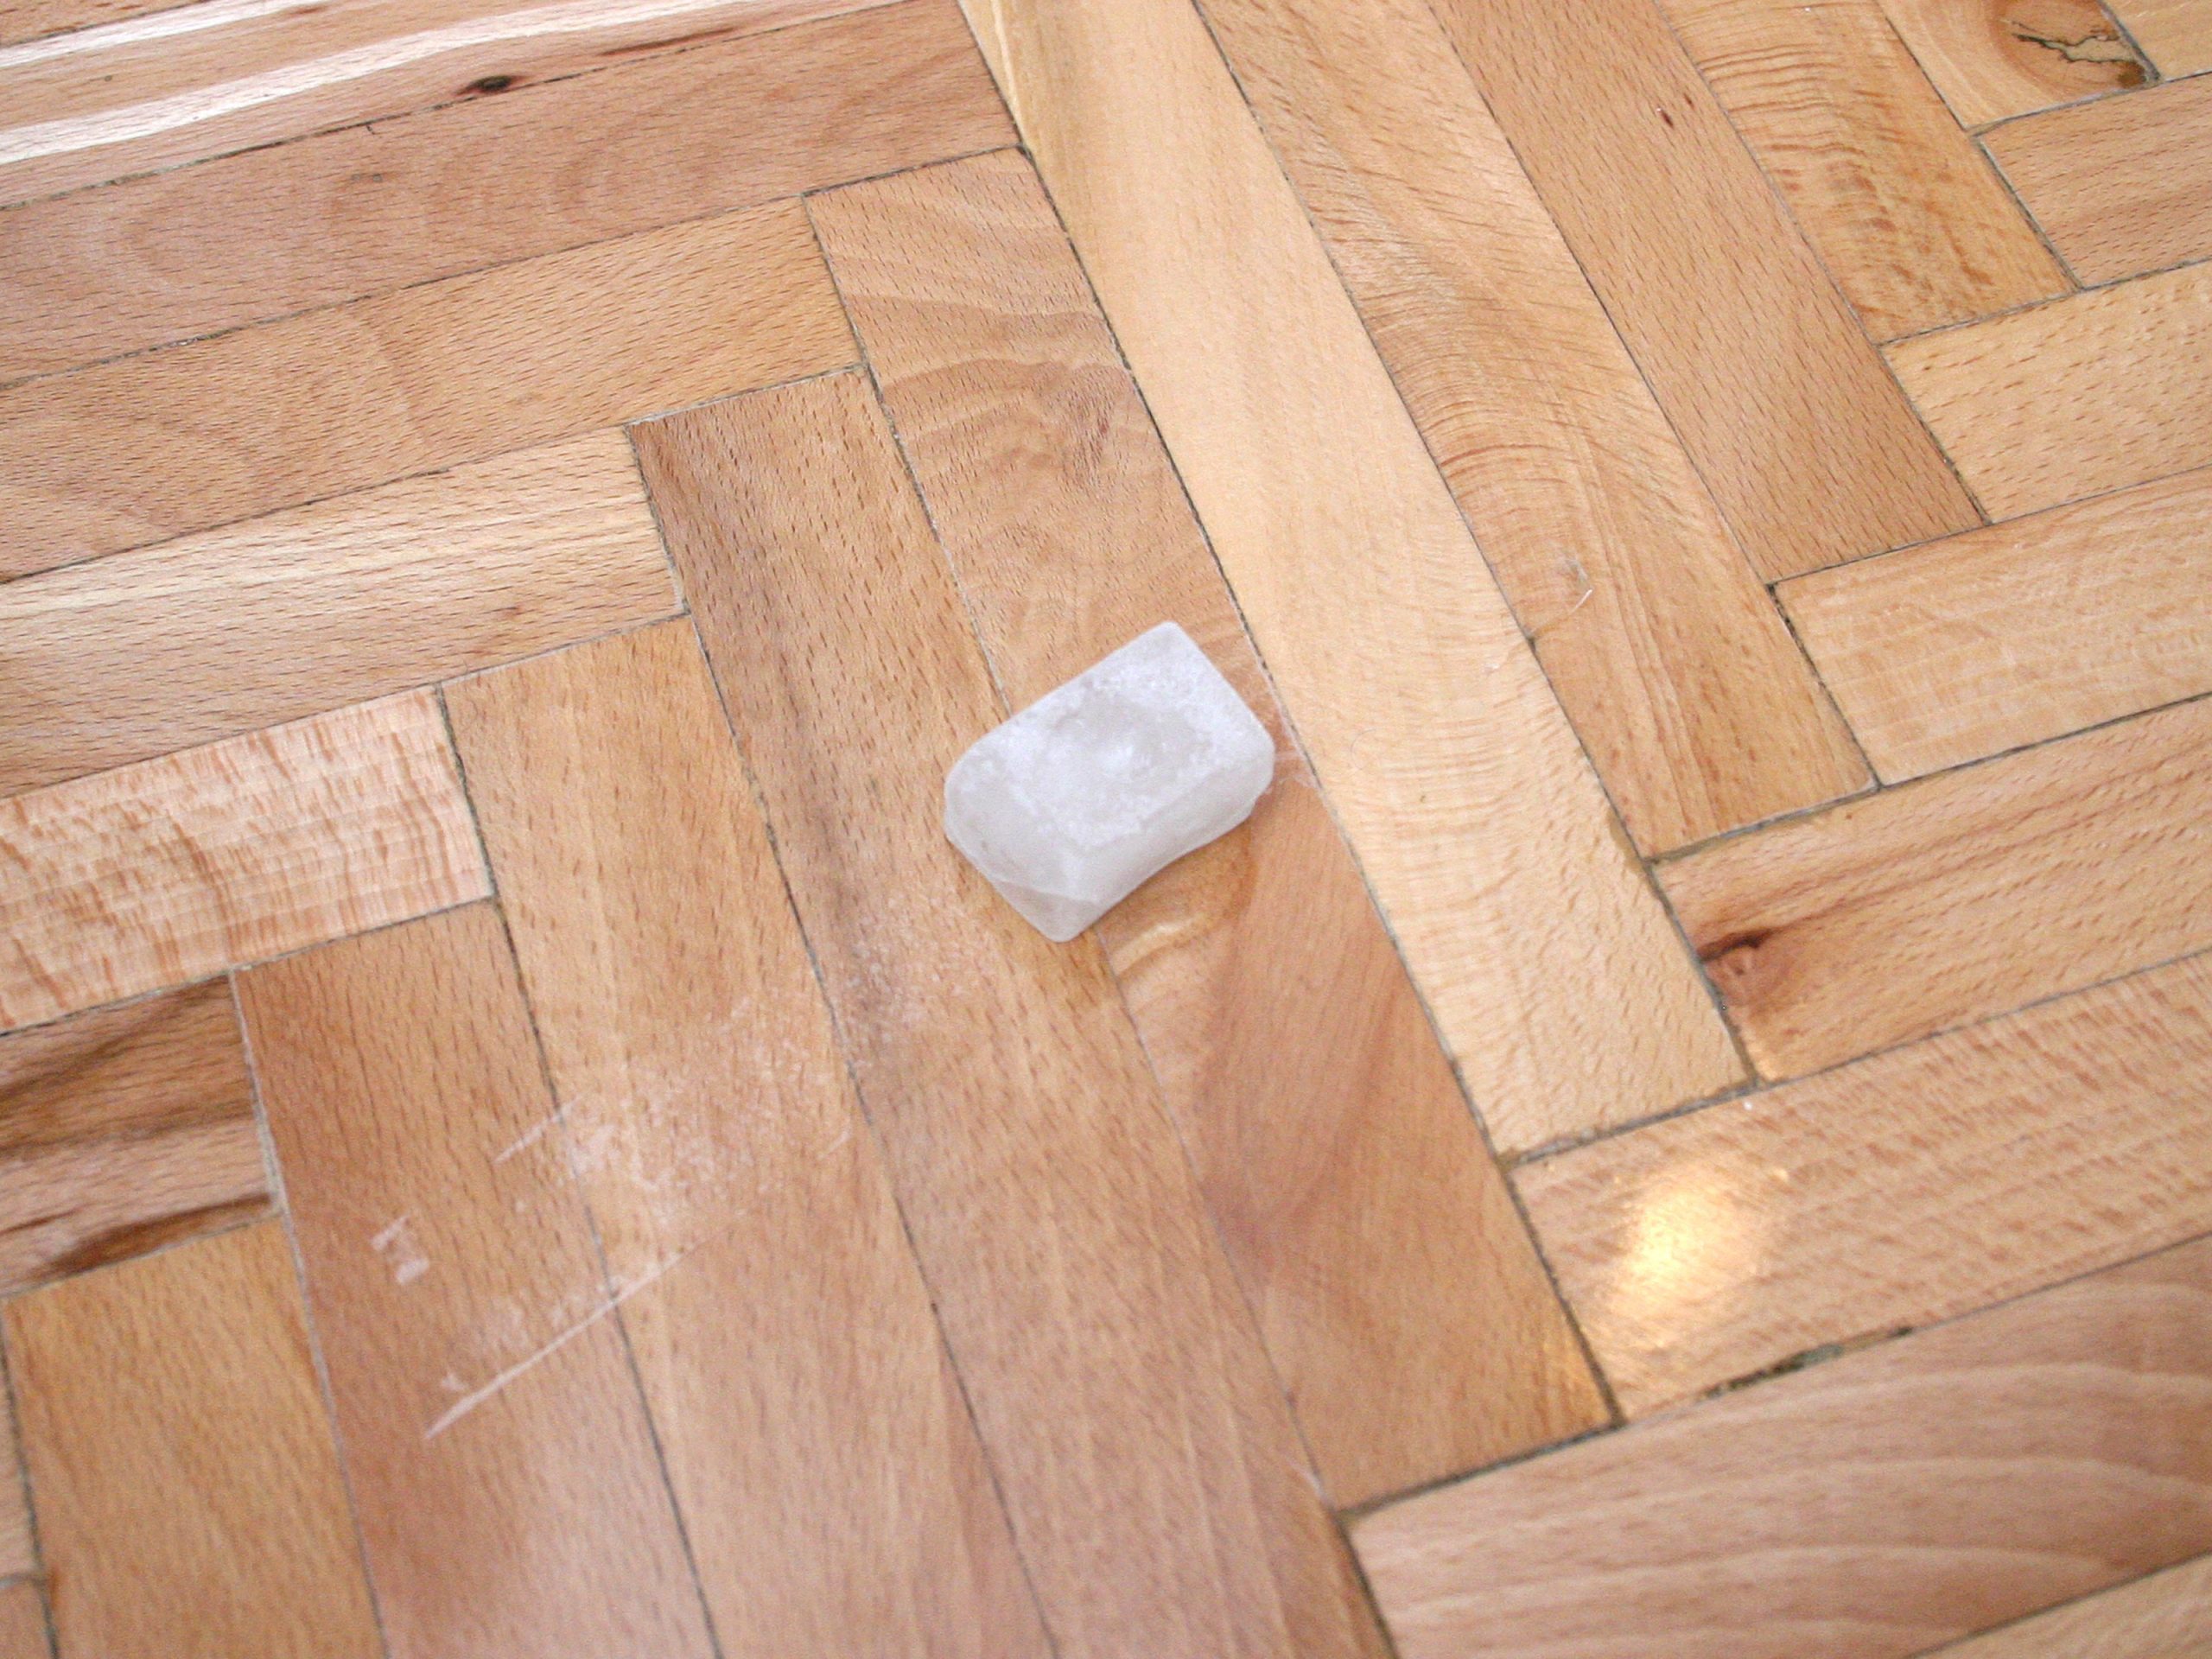 removing-stains-from-the-floor|removing-stains|removing-stains